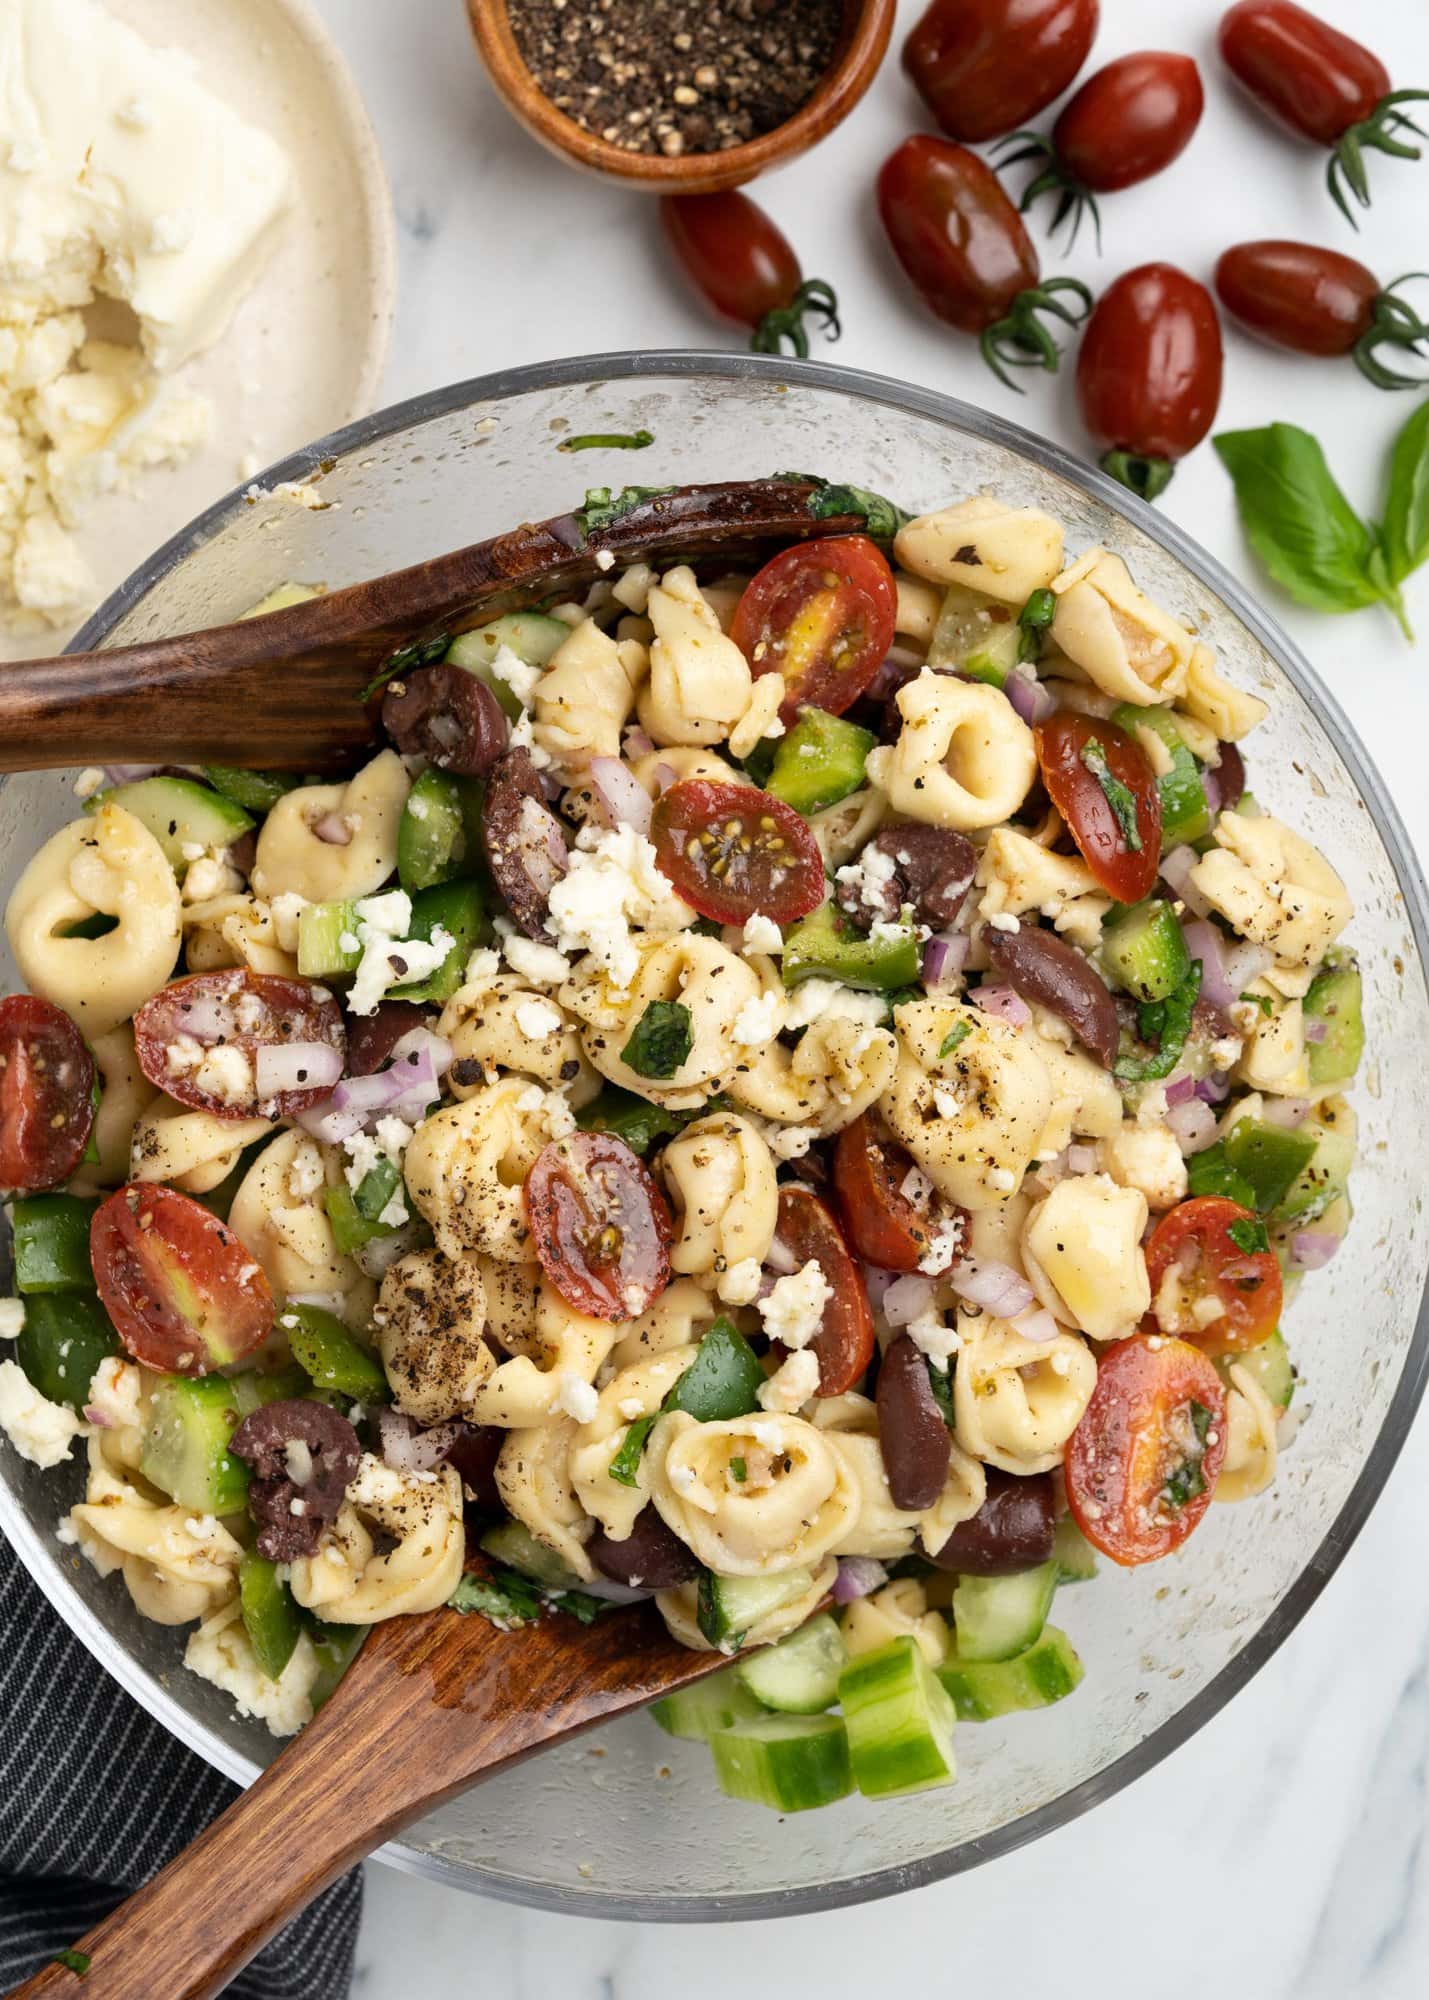 Tortellini pasta salad with greek dressing and feta sprinkled on top in a glass bowl with a wooden spatula.